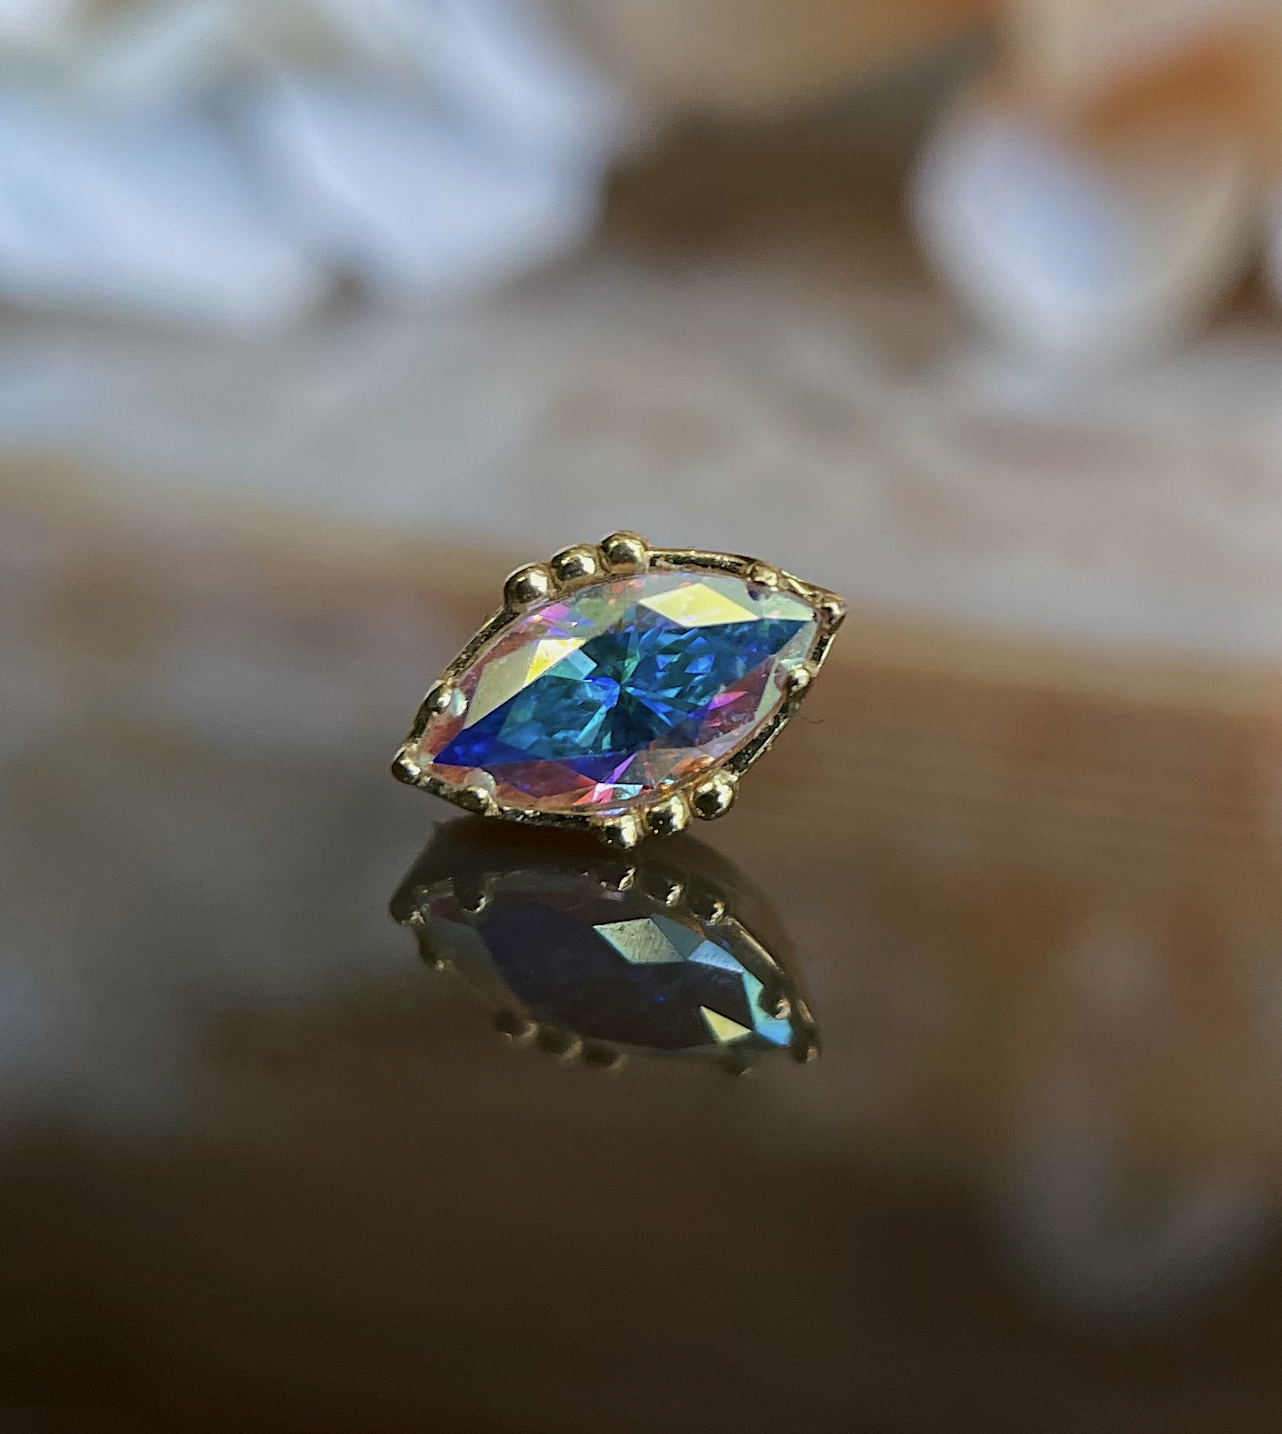 "Lindsey Marquise" with Aurora CZ by Anatometal